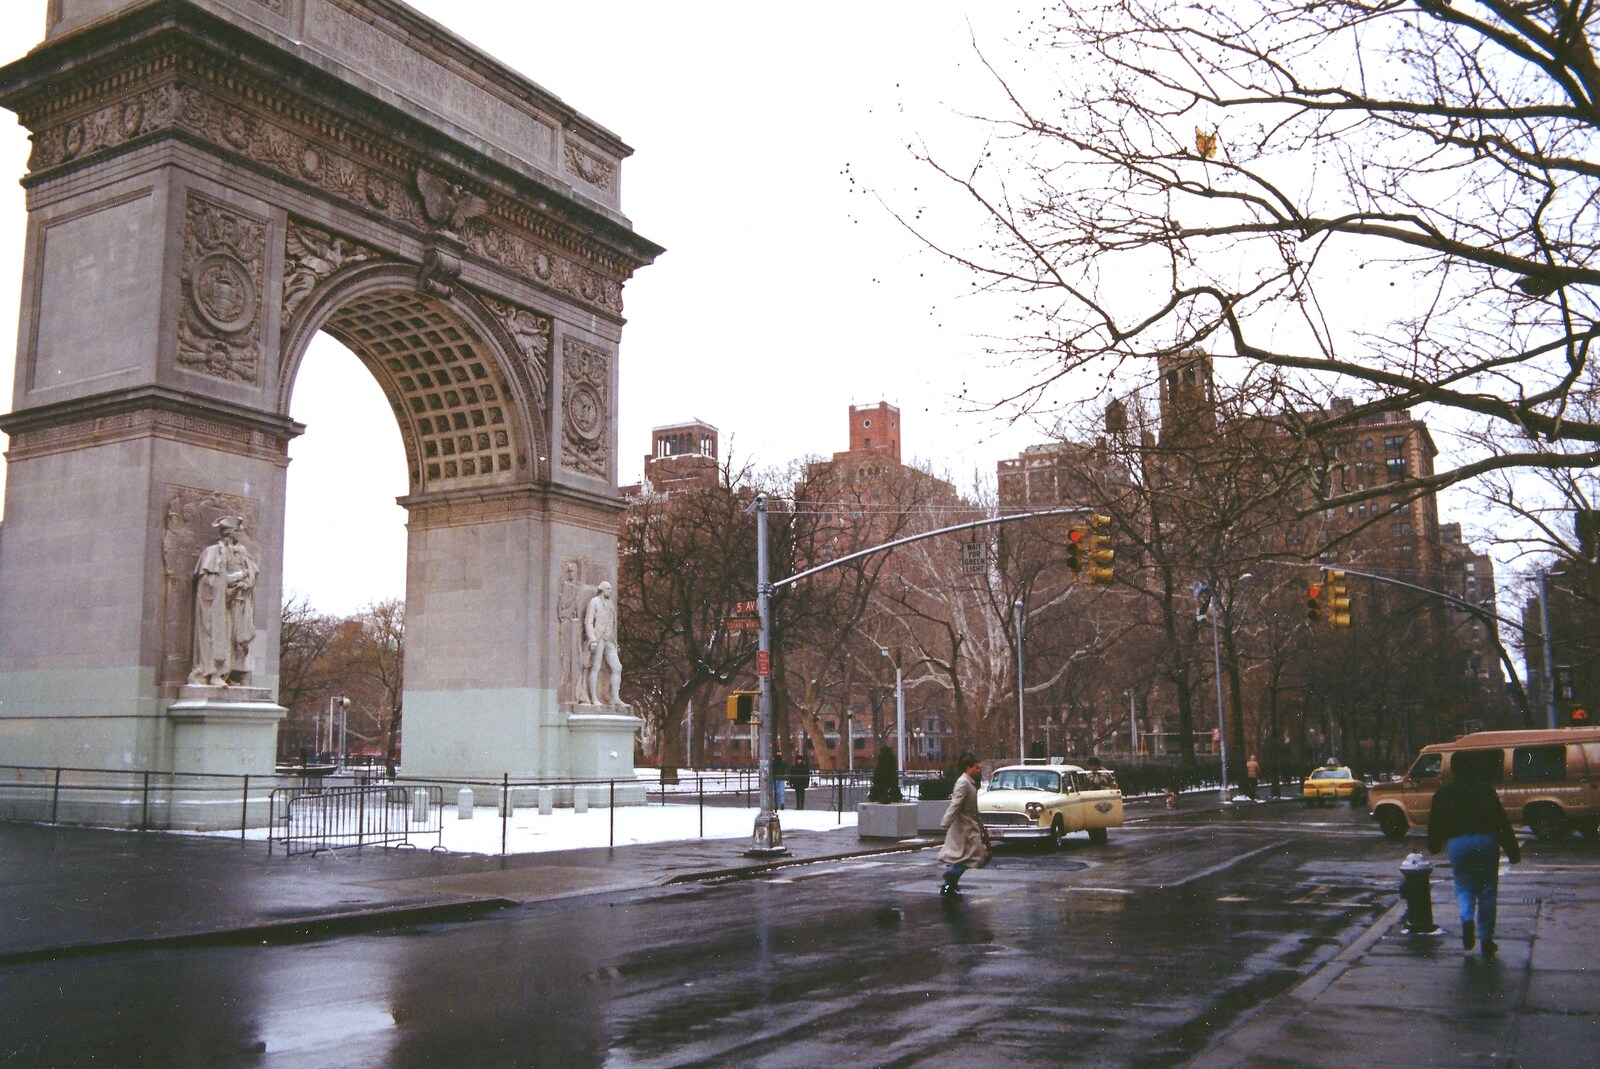 Washington Square and an old cab from A Trip to New York, New York, USA - 11th March 1995